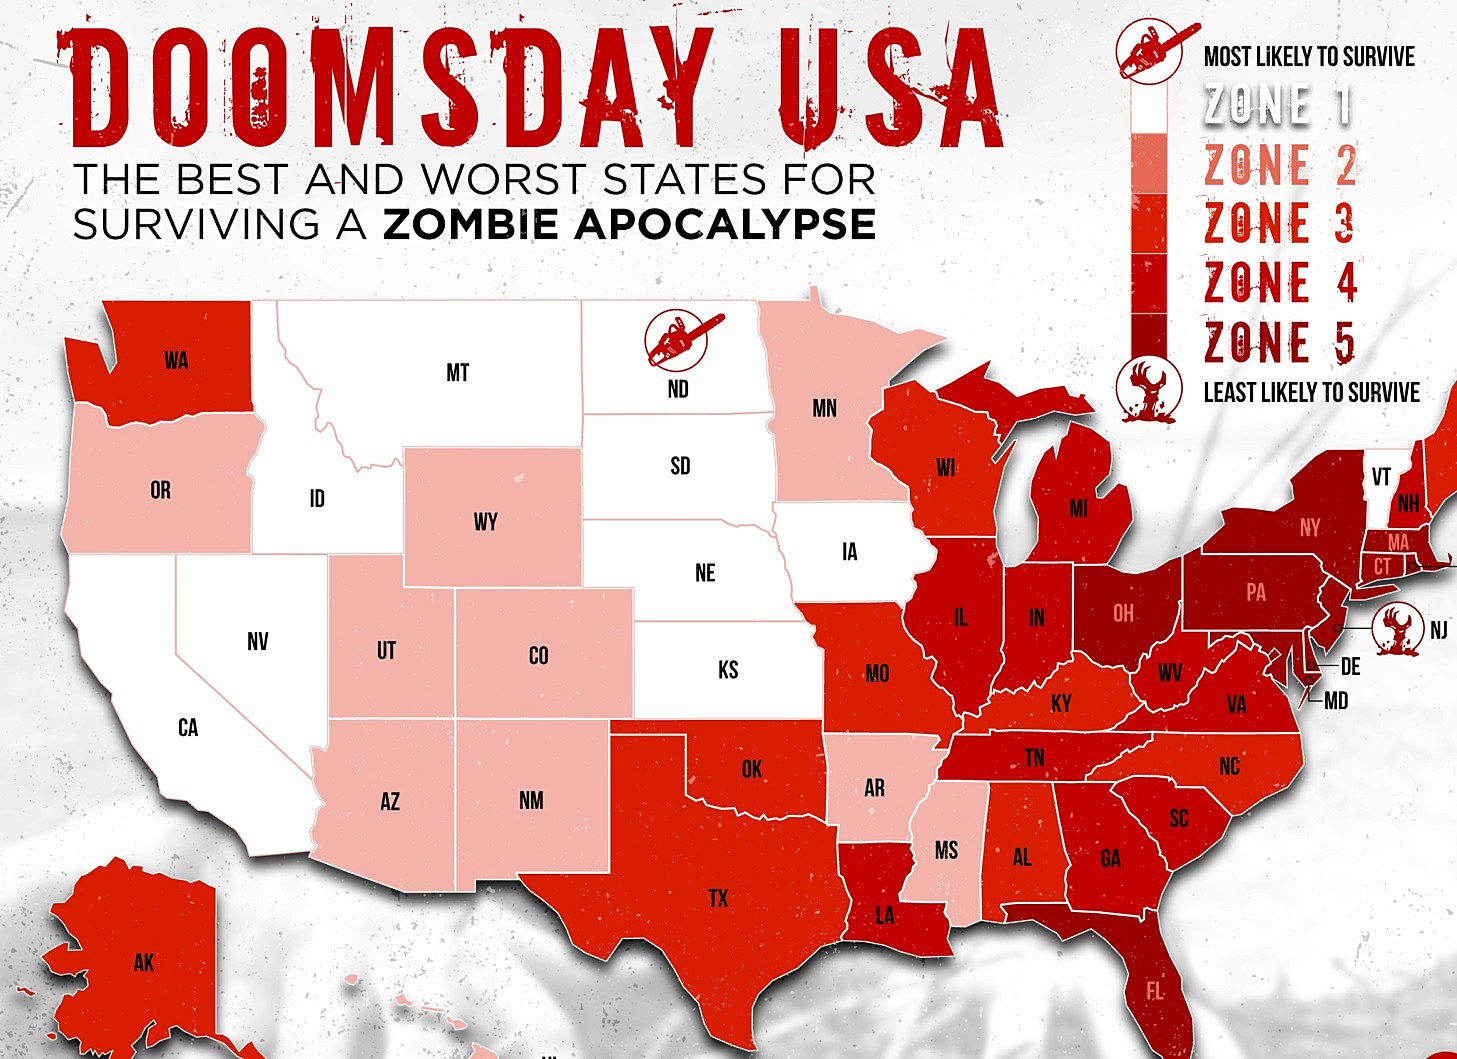 Experts Say to Survive a Zombie Apocalypse, Come to Iowa